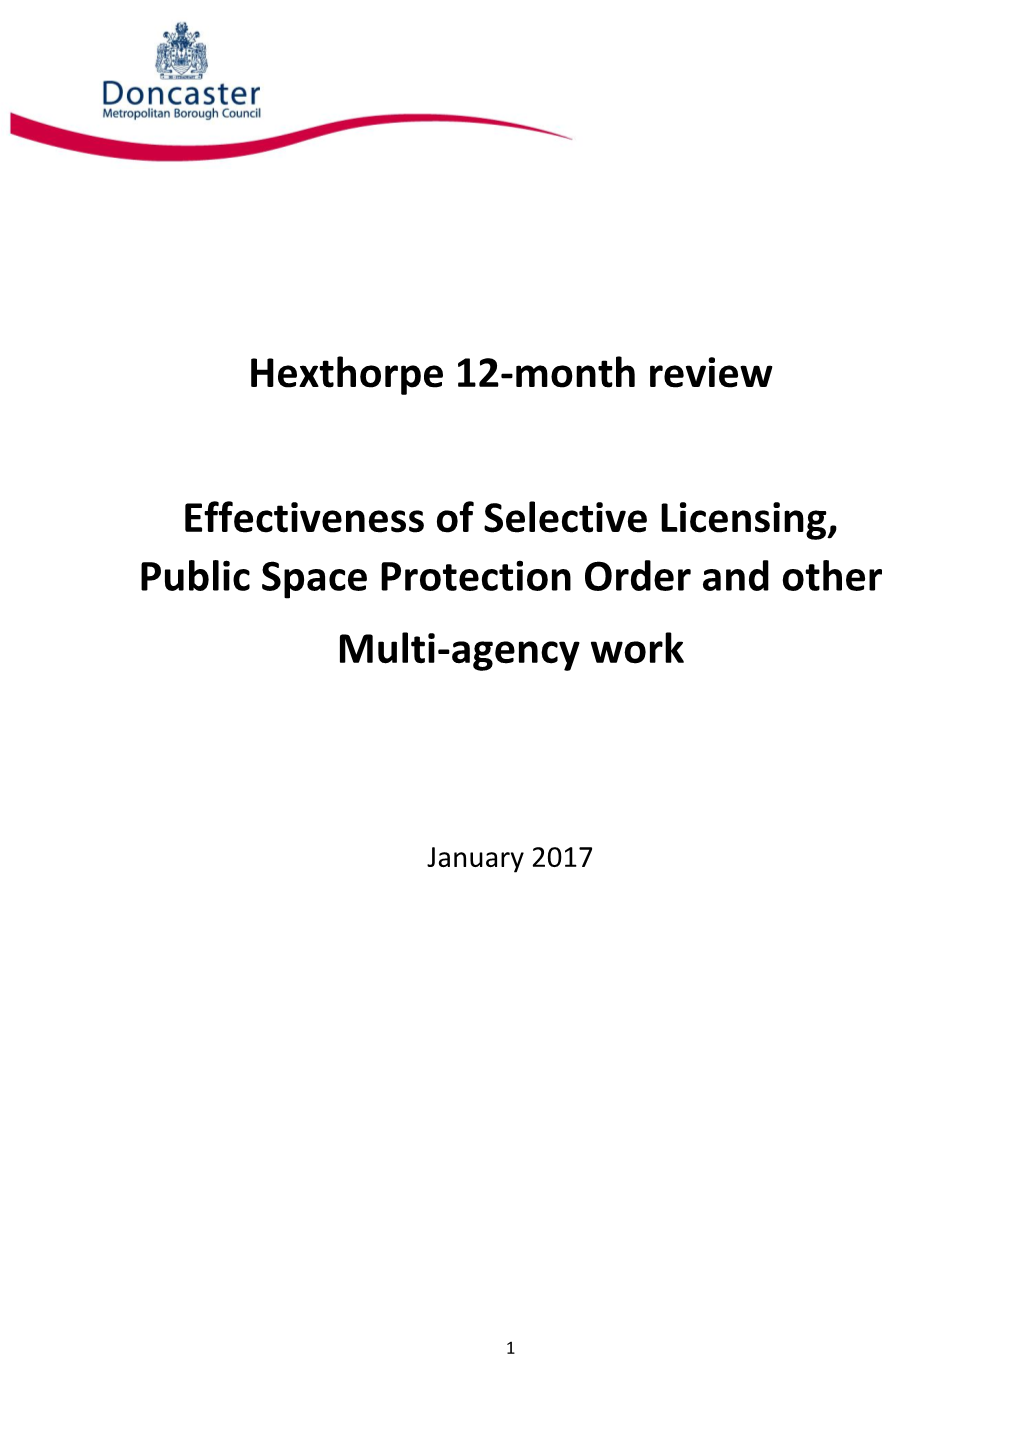 Hexthorpe 12-Month Review Effectiveness of Selective Licensing